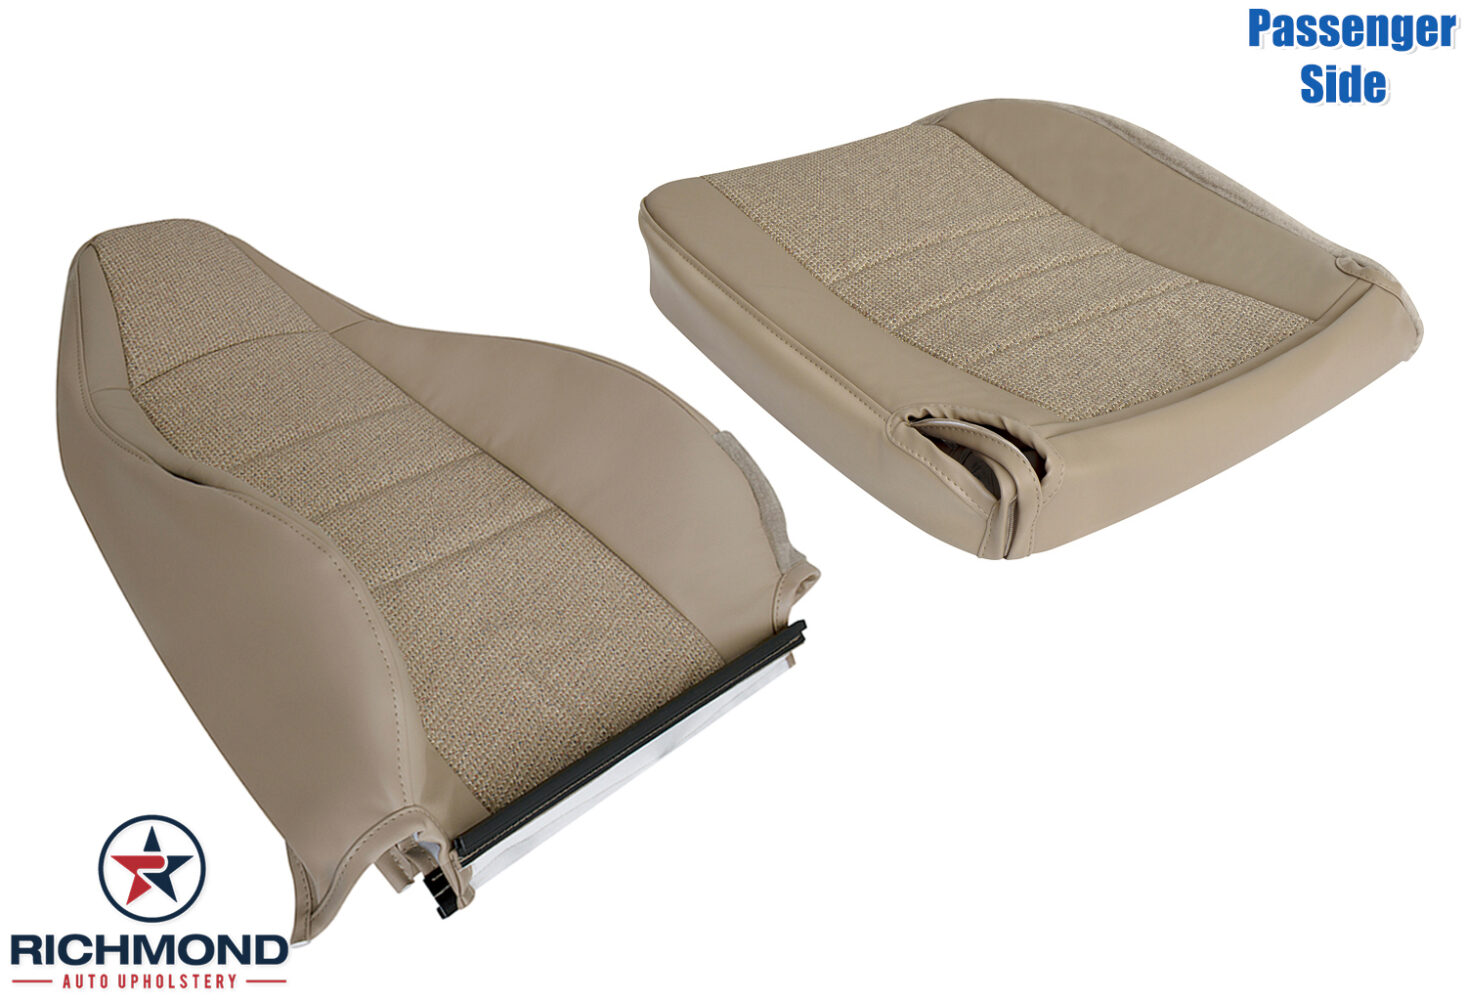 1997-2006 Jeep Wrangler Replacement Leather/Vinyl Seat Covers: Passenger  Side Bottom, Tan Camel - Richmond Auto Upholstery